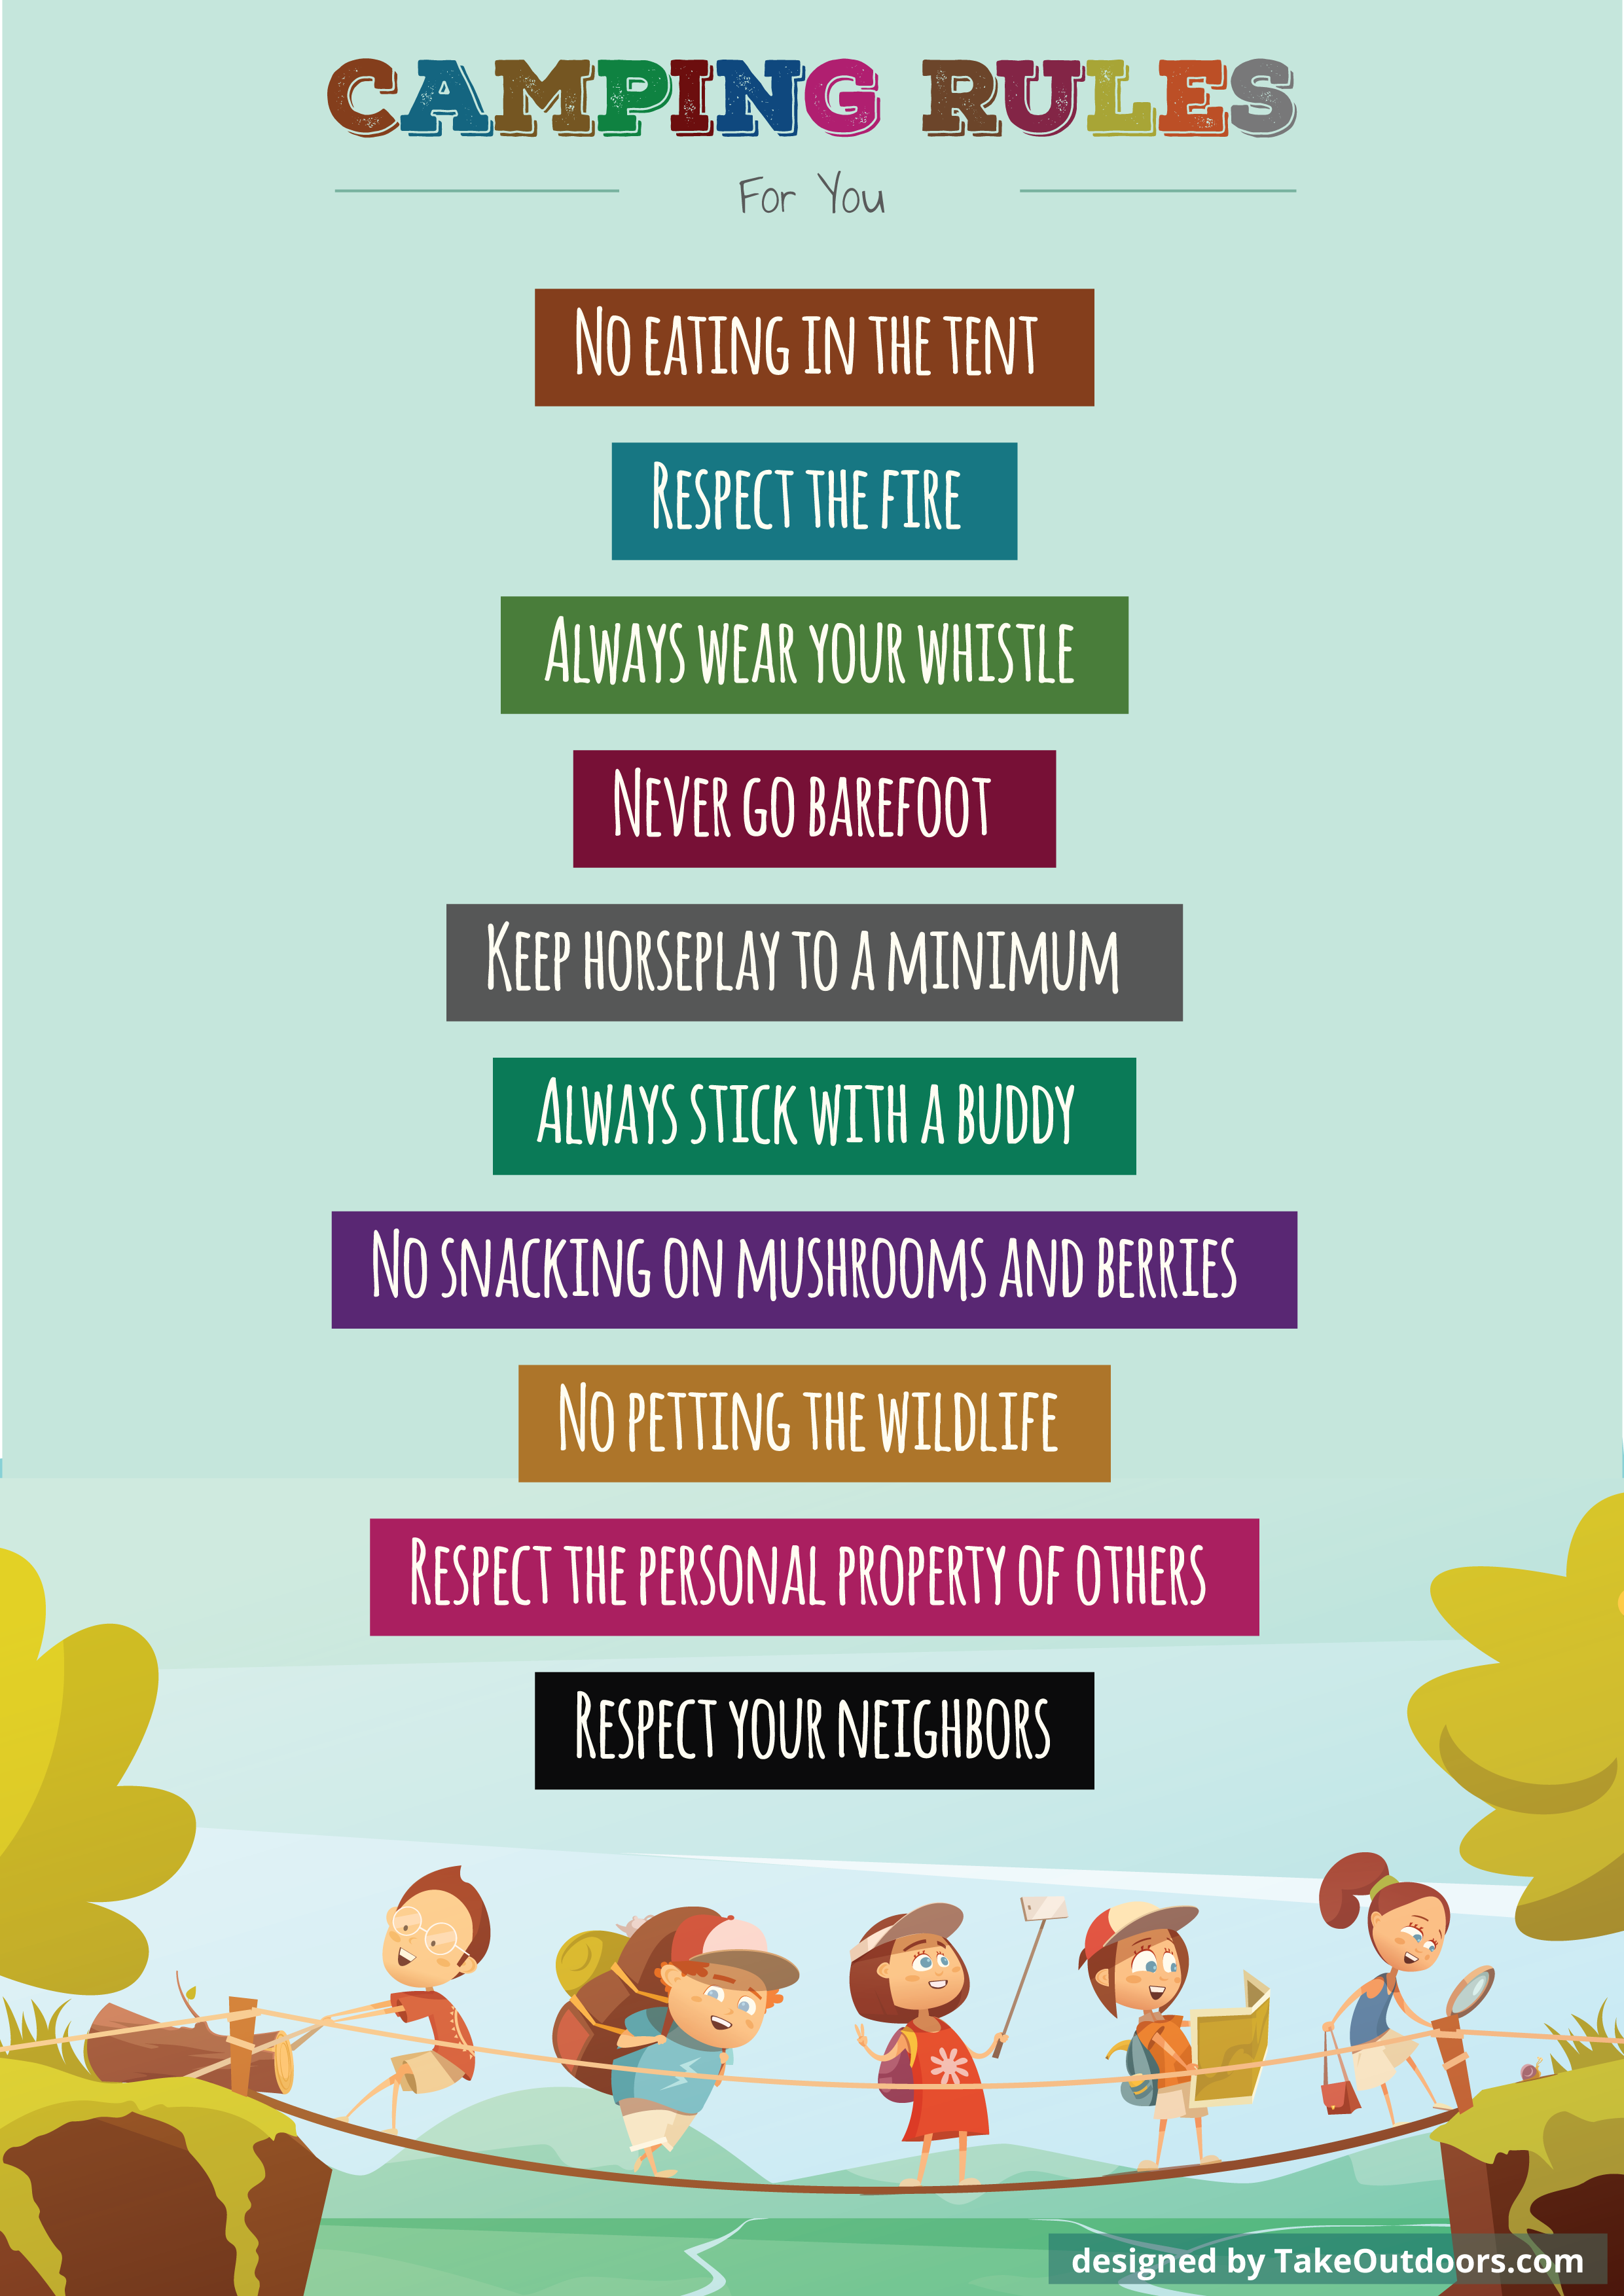 Summer Camp Rules. Campsite Rules правила. Camp Rules for Kids.